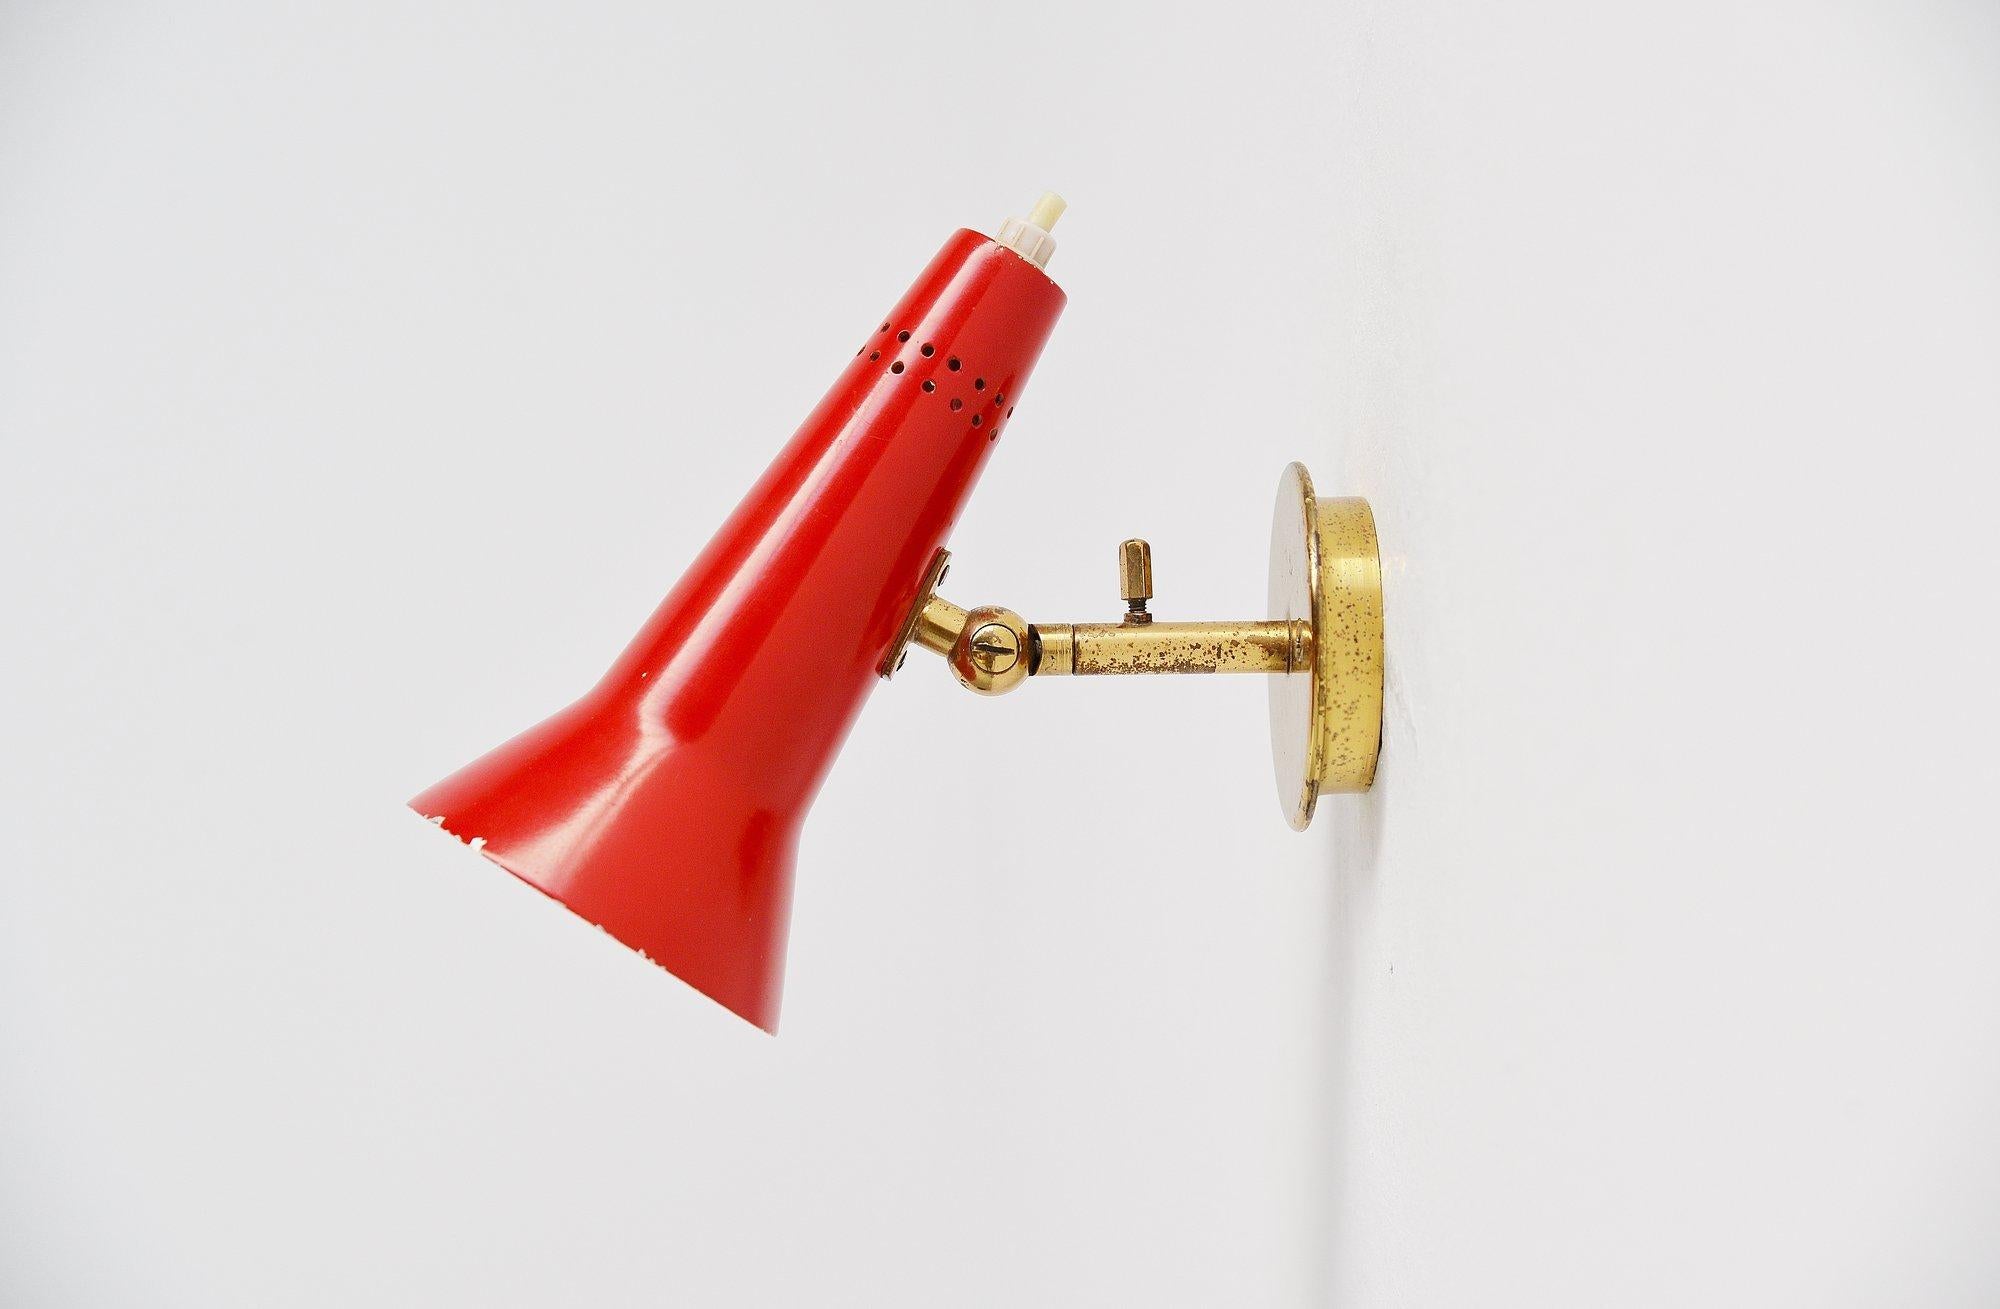 Early small sconce model 21 designed by Gino Sarfatti, manufactured by Arteluce, Italy 1955. This early wall lamp has a brass wall plate and a red painted shade with die cut dot pattern at the top of the shade. The lamp is marked with Arteluce